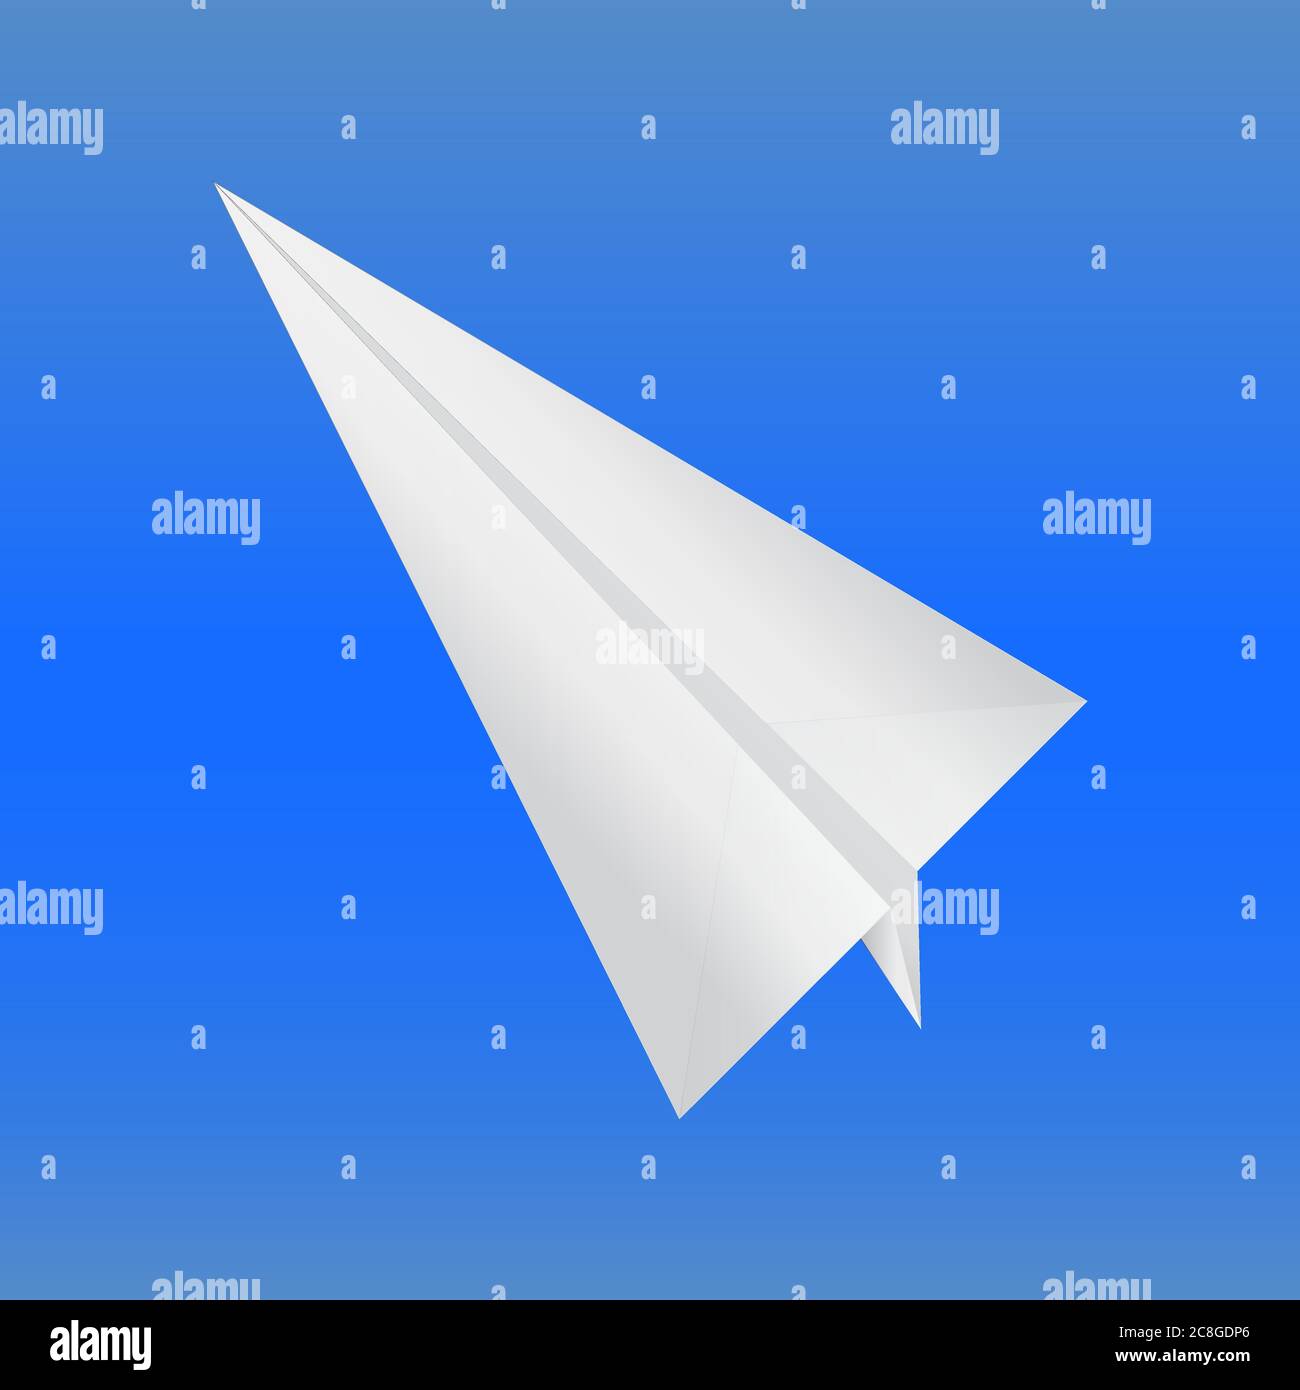 Paper airplane plane aeroplane on a blue background Stock Vector